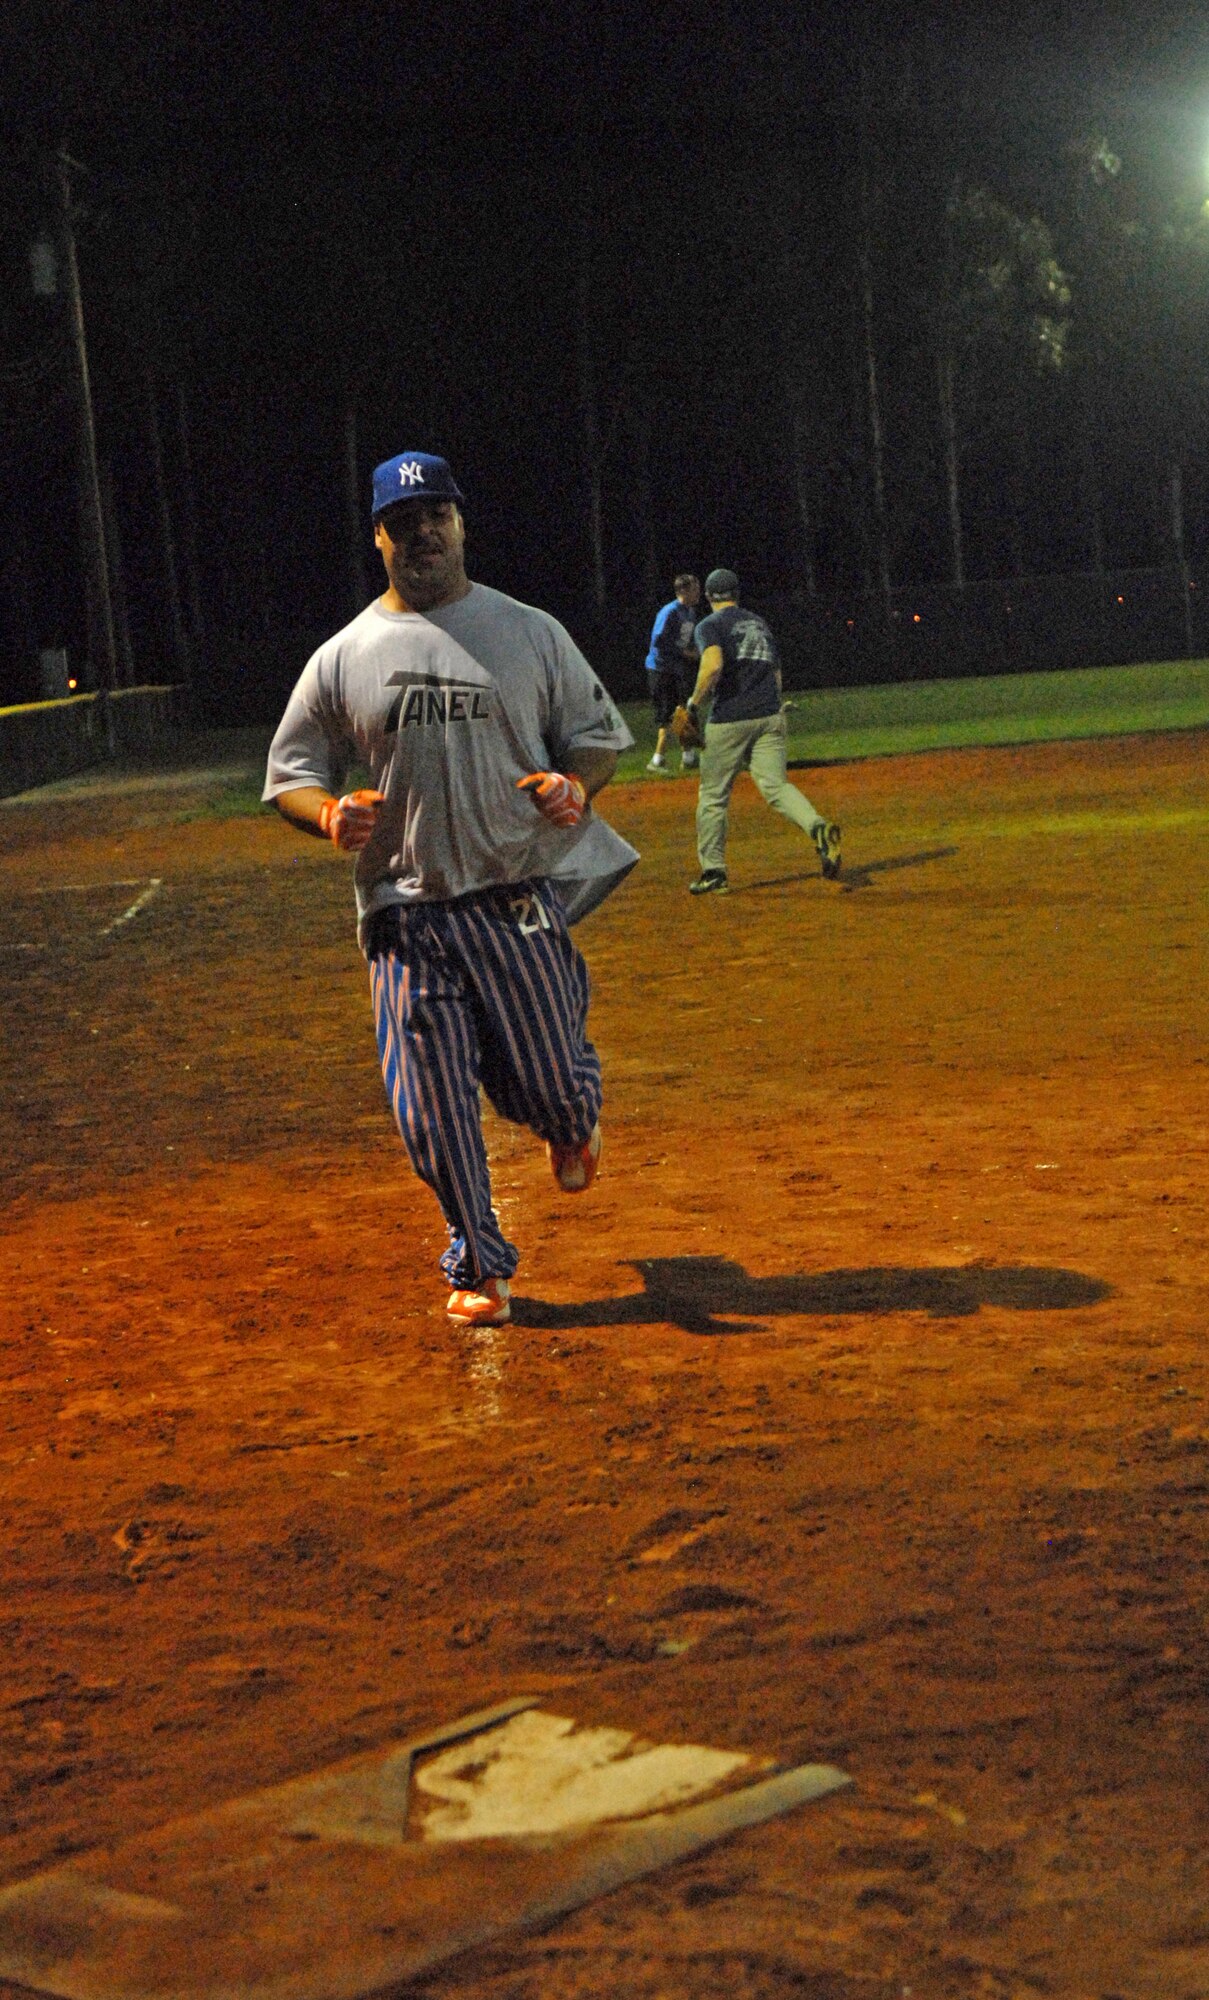 VANDENBERG AIR FORCE BASE, Calif. -- Sprinting to home plate, Efrain Roldan a team member of the Army Prison Guards scores a home run at the base softball field here Tuesday, Feb. 16, 2010, during a practice game against the 30th Space Communications Squadron. There are a total of 13 teams competing in Vandenberg’s winter intramural softball season. (U.S. Air Force photo/Airman 1st Class Kerelin Molina)
